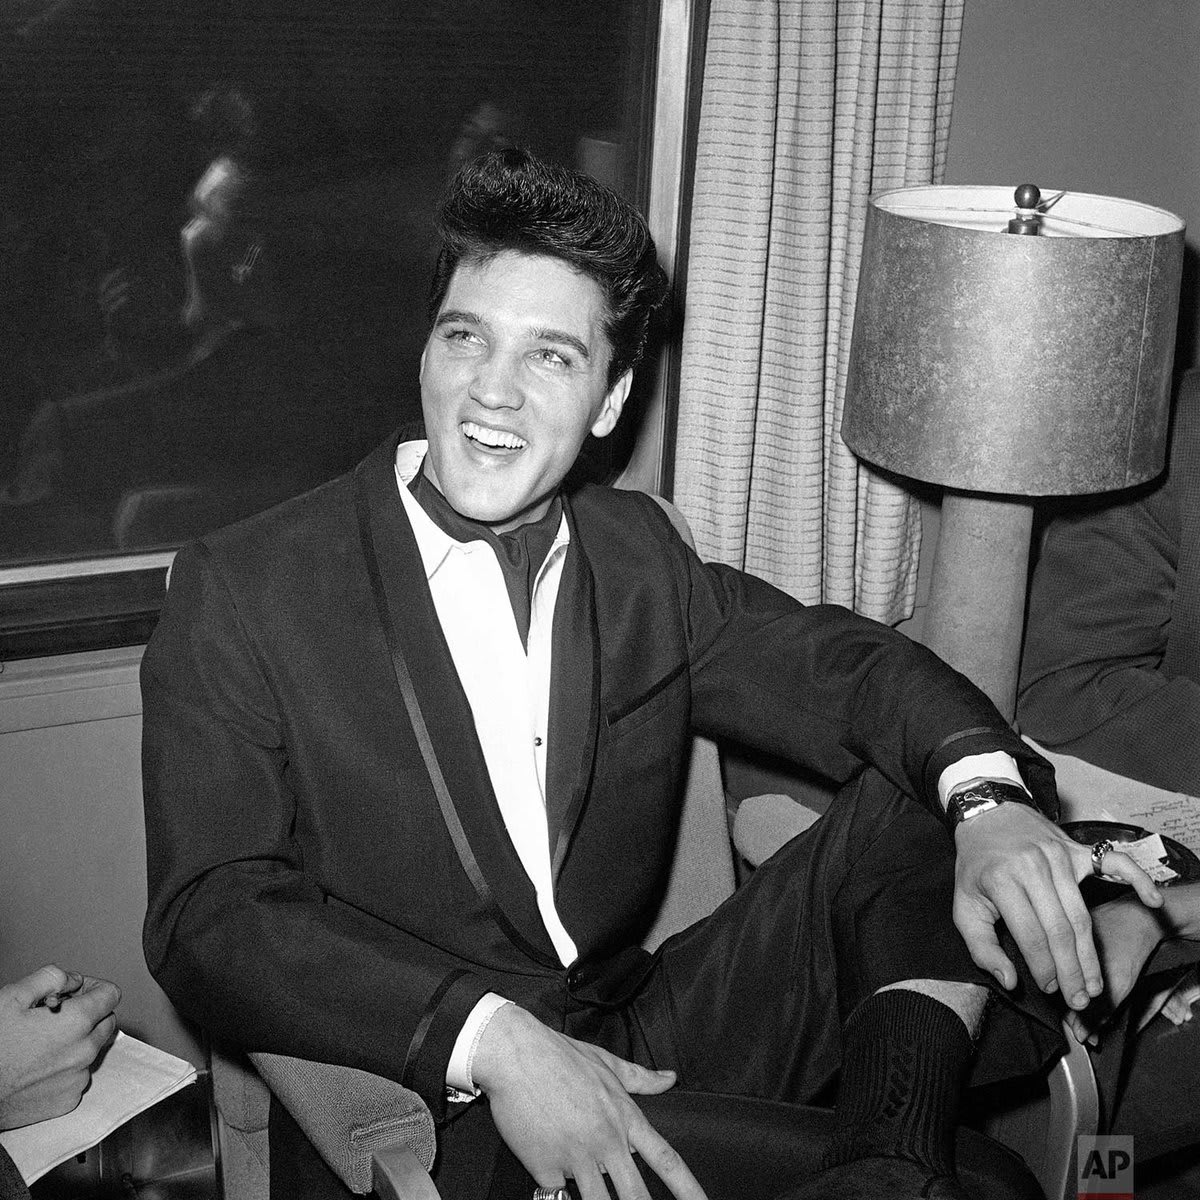 85 years ago today, rock-and-roll legend Elvis Presley was born in Tupelo, Mississippi. | Photo Harold P. Matosian